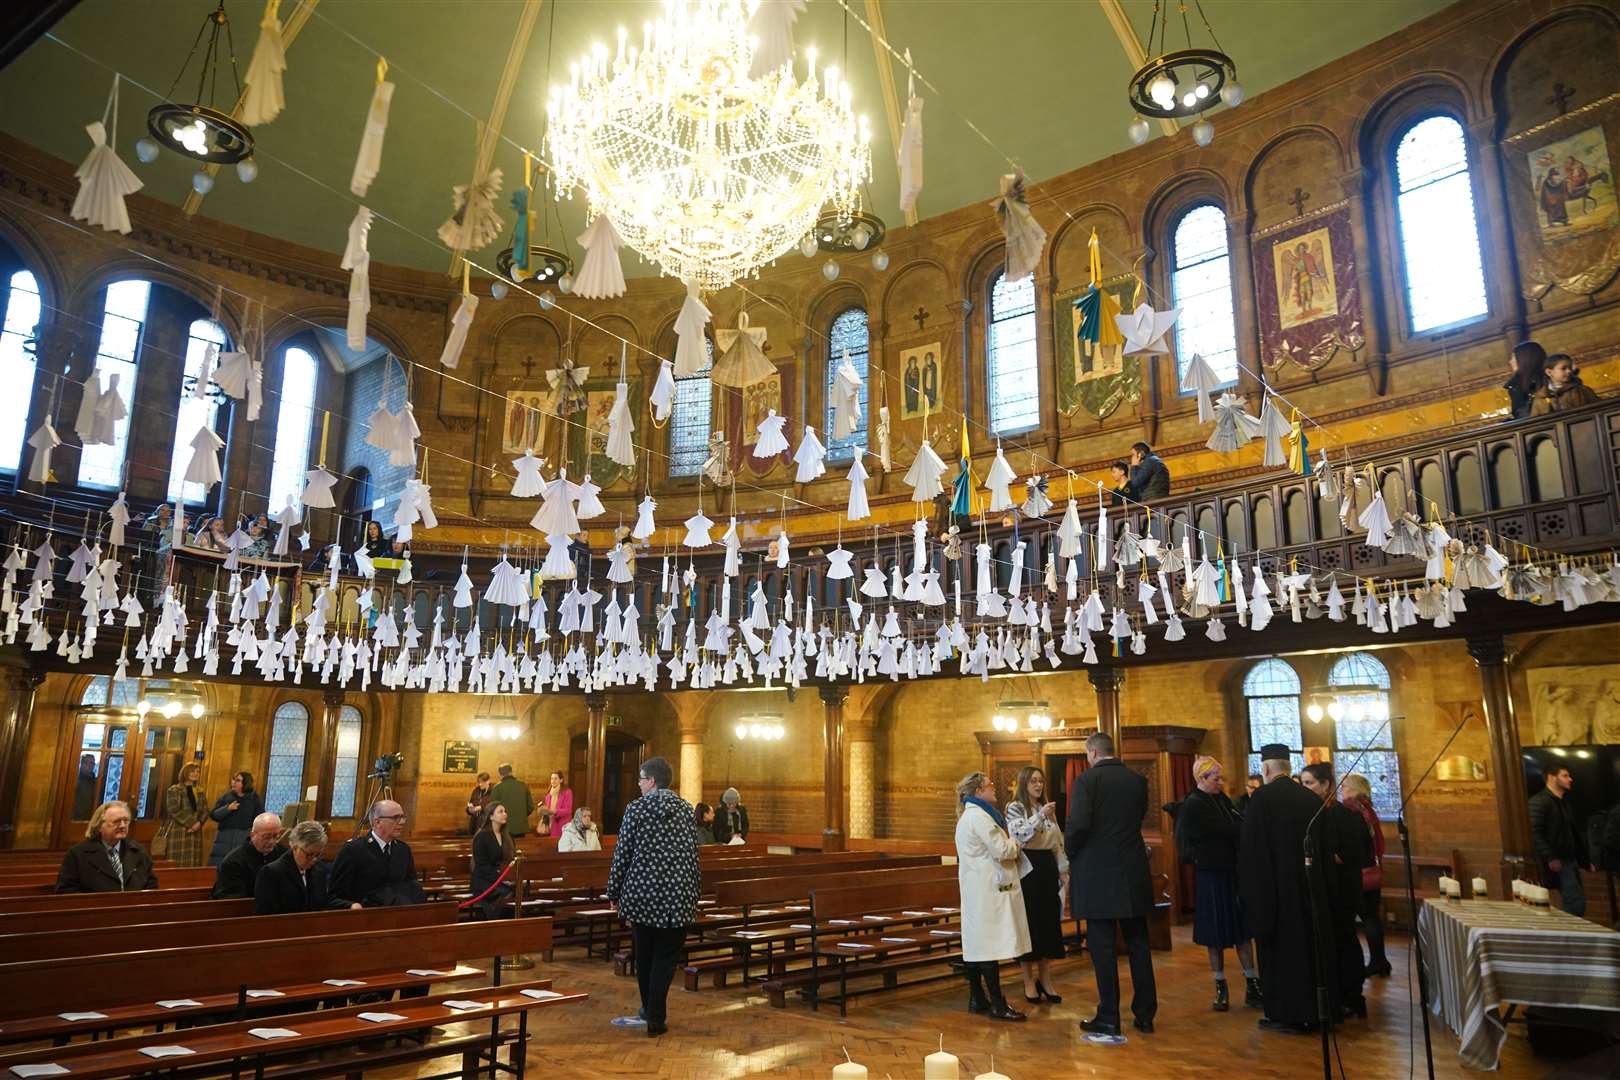 Some 461 paper angels, one for each child that has died in the past year according to official statistics, hang from the roof of the Ukrainian Catholic Cathedral in London (Yui Mok/PA)